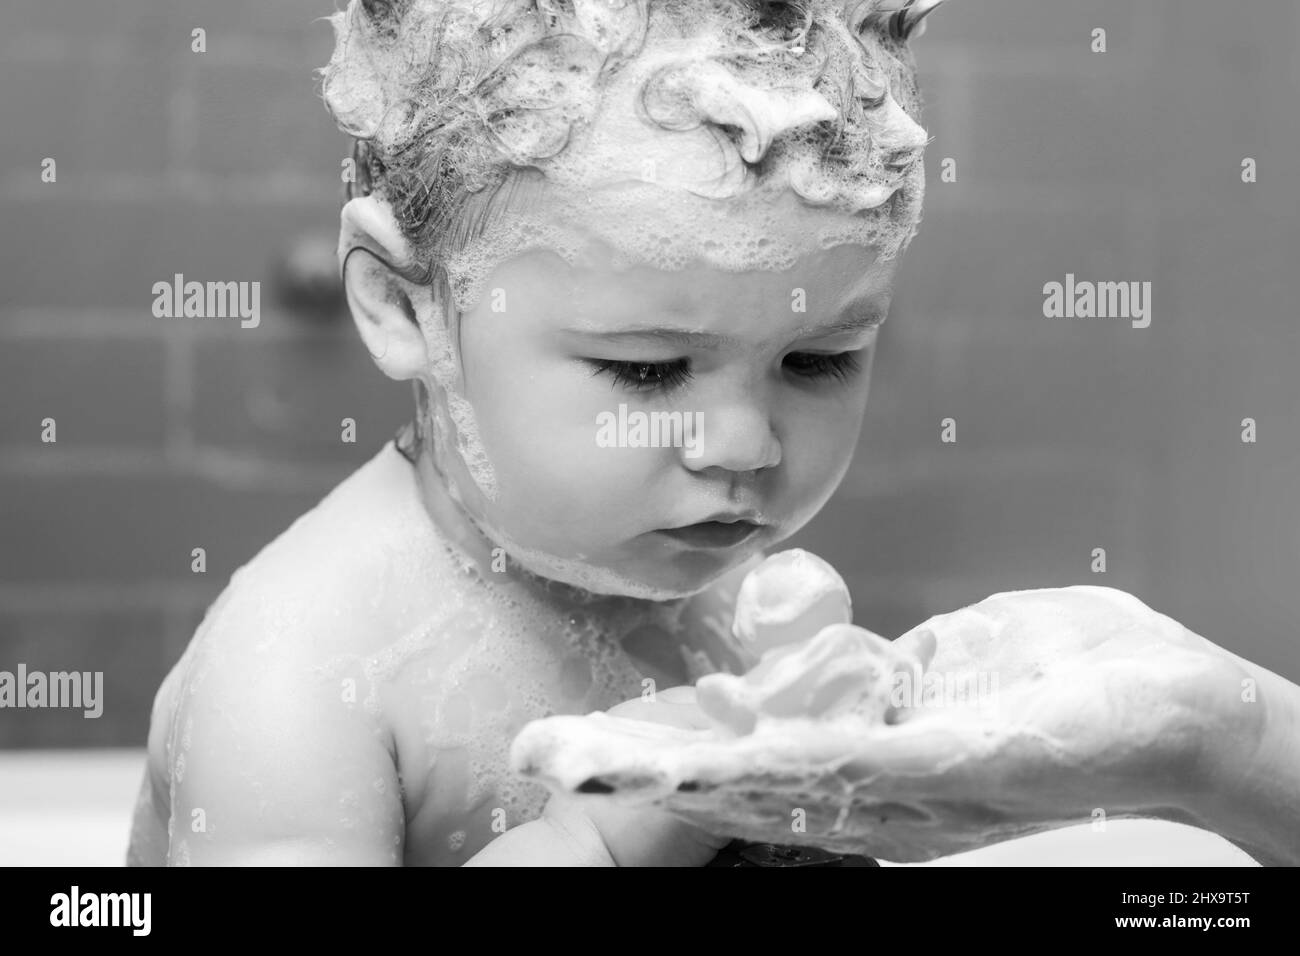 Hygiene and body care for children. Baby child washing in a bathroom in ...